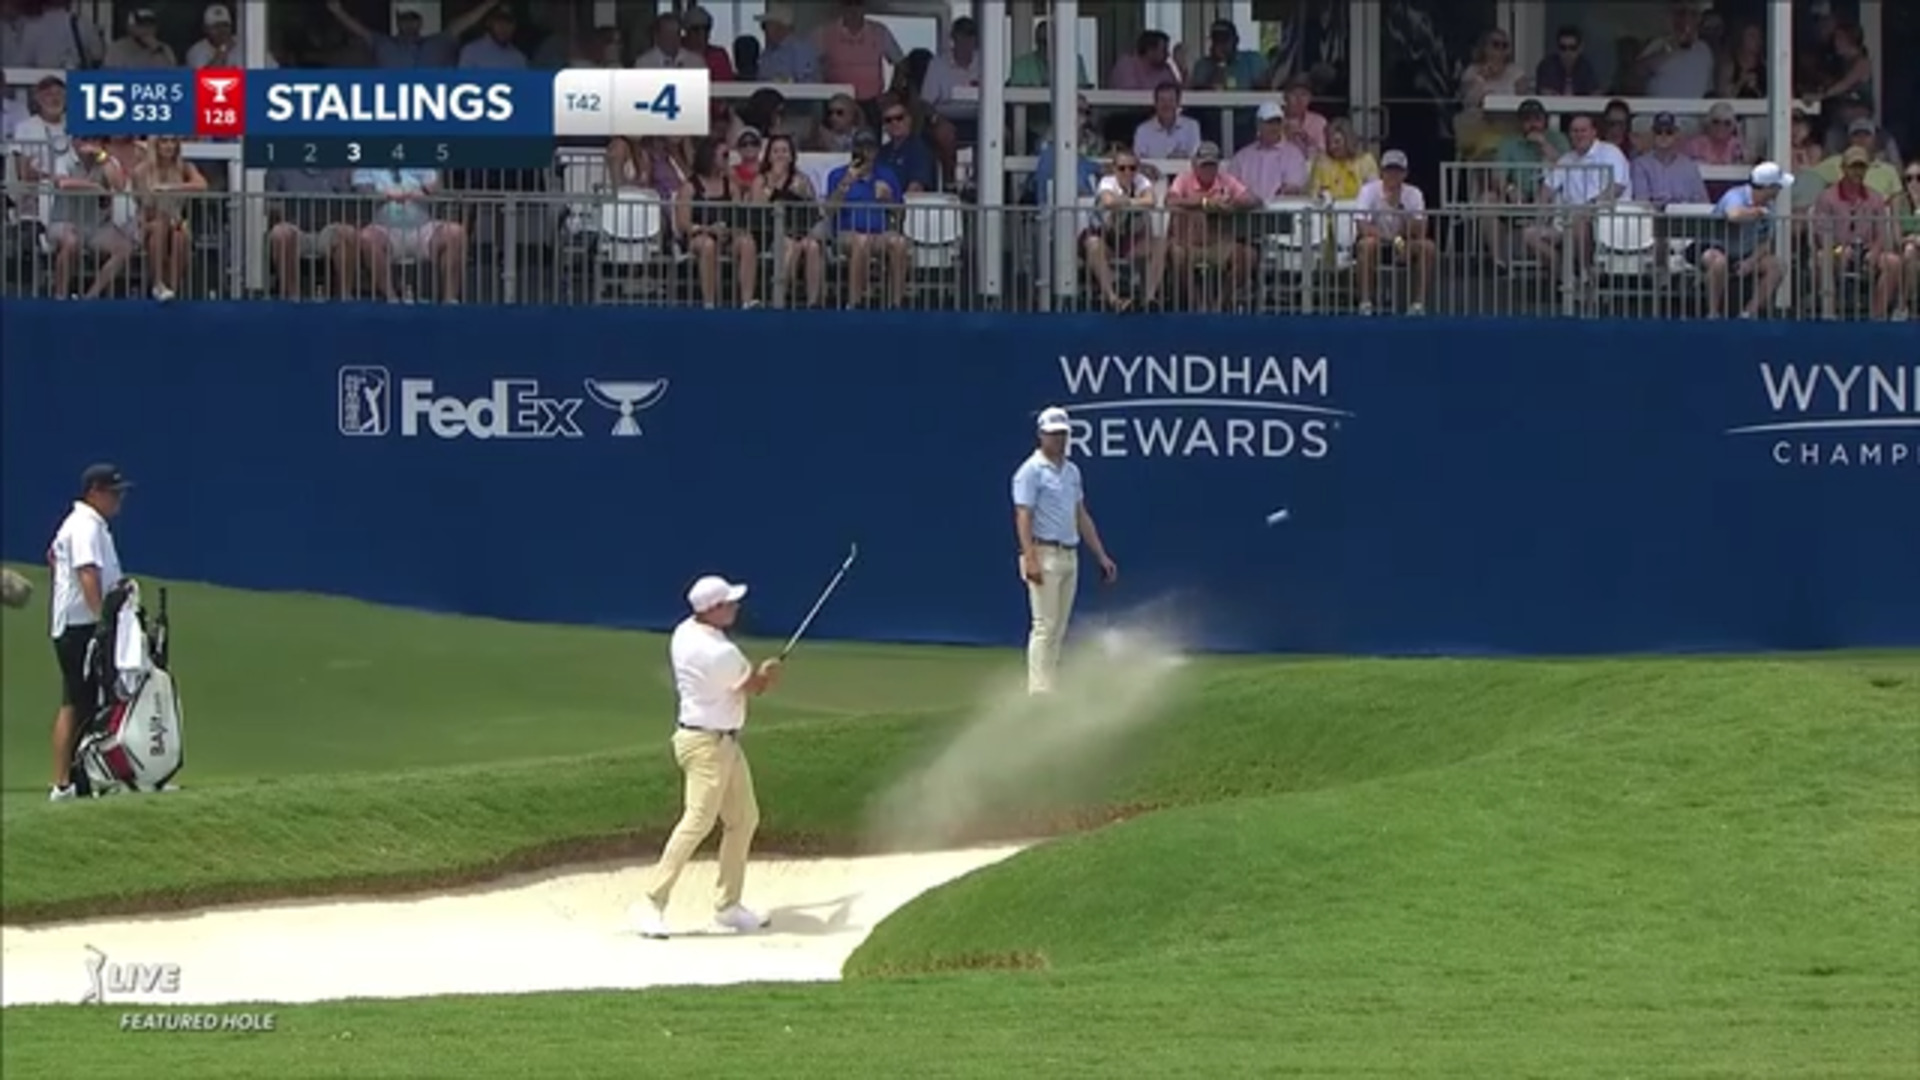 Scott Stallings gets up-and-down from greenside bunker at Wyndham